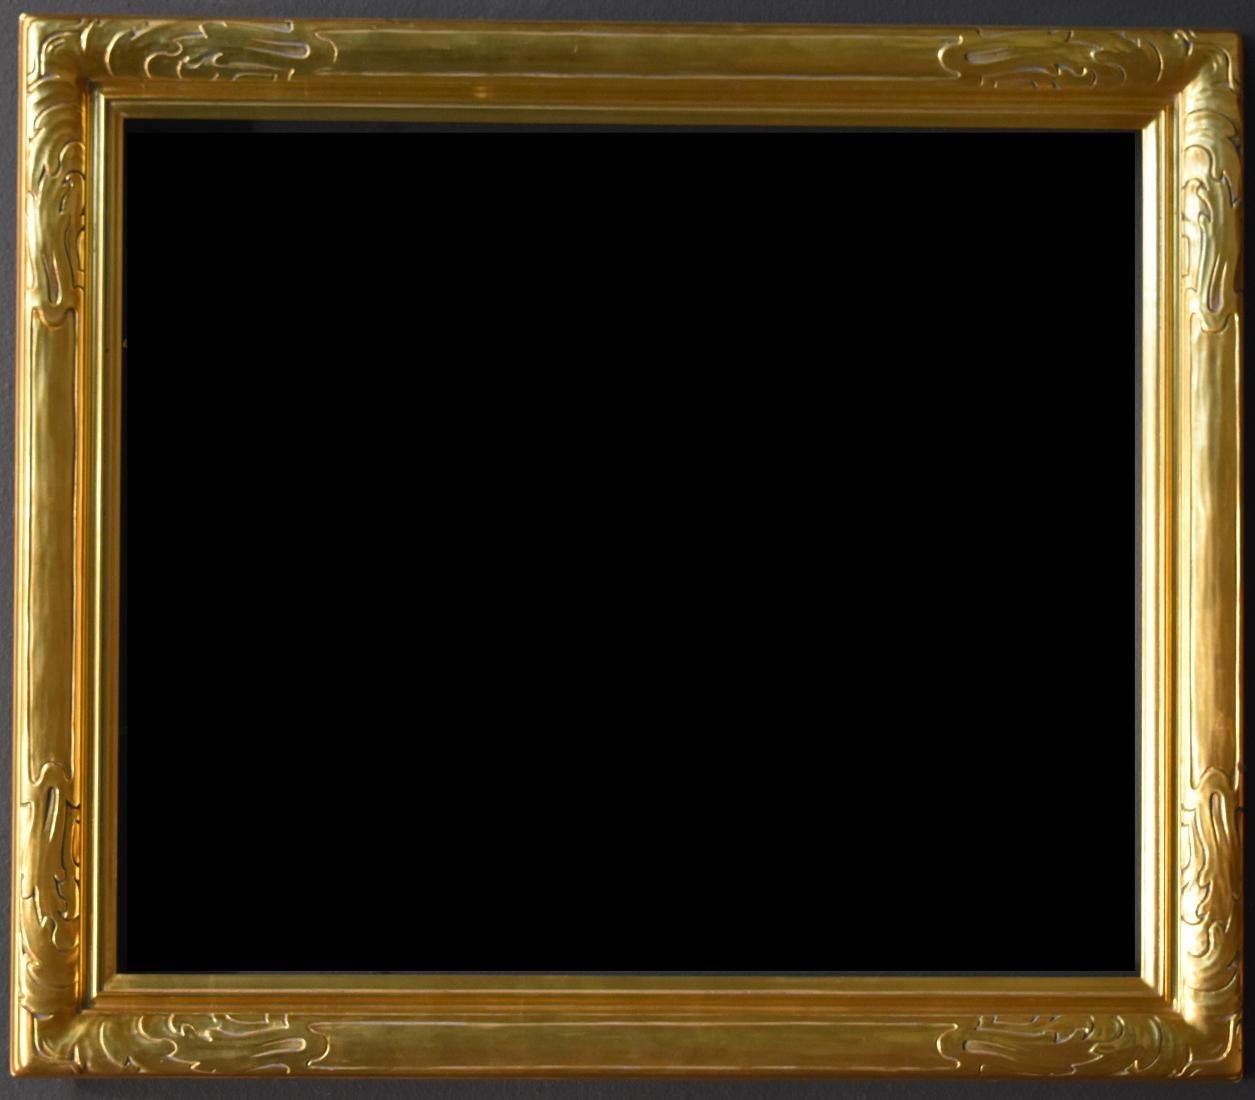 Newcomb Macklin Frame Co. Landscape Painting - Newcomb Macklin Hand Carved Gold Leaf Frame. Fits 25 x 30 Painting. Ext. 30 x 35